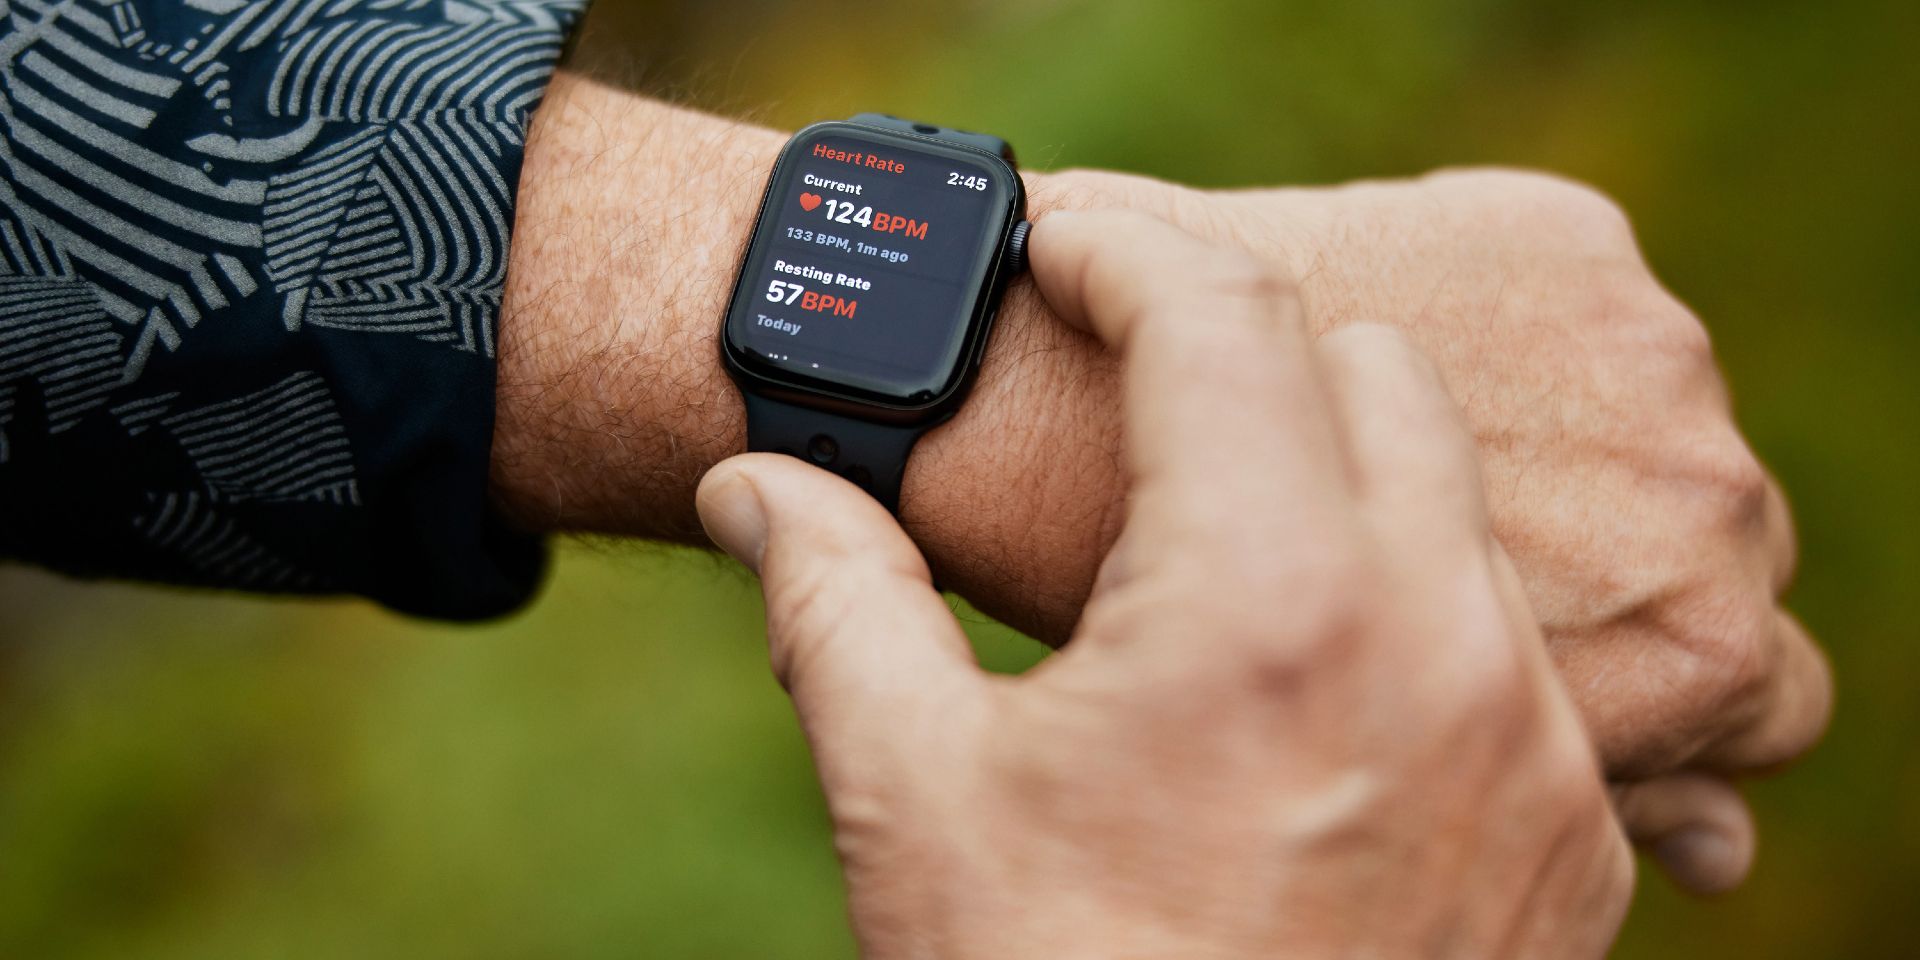 Apple Watch heart rate monitoring